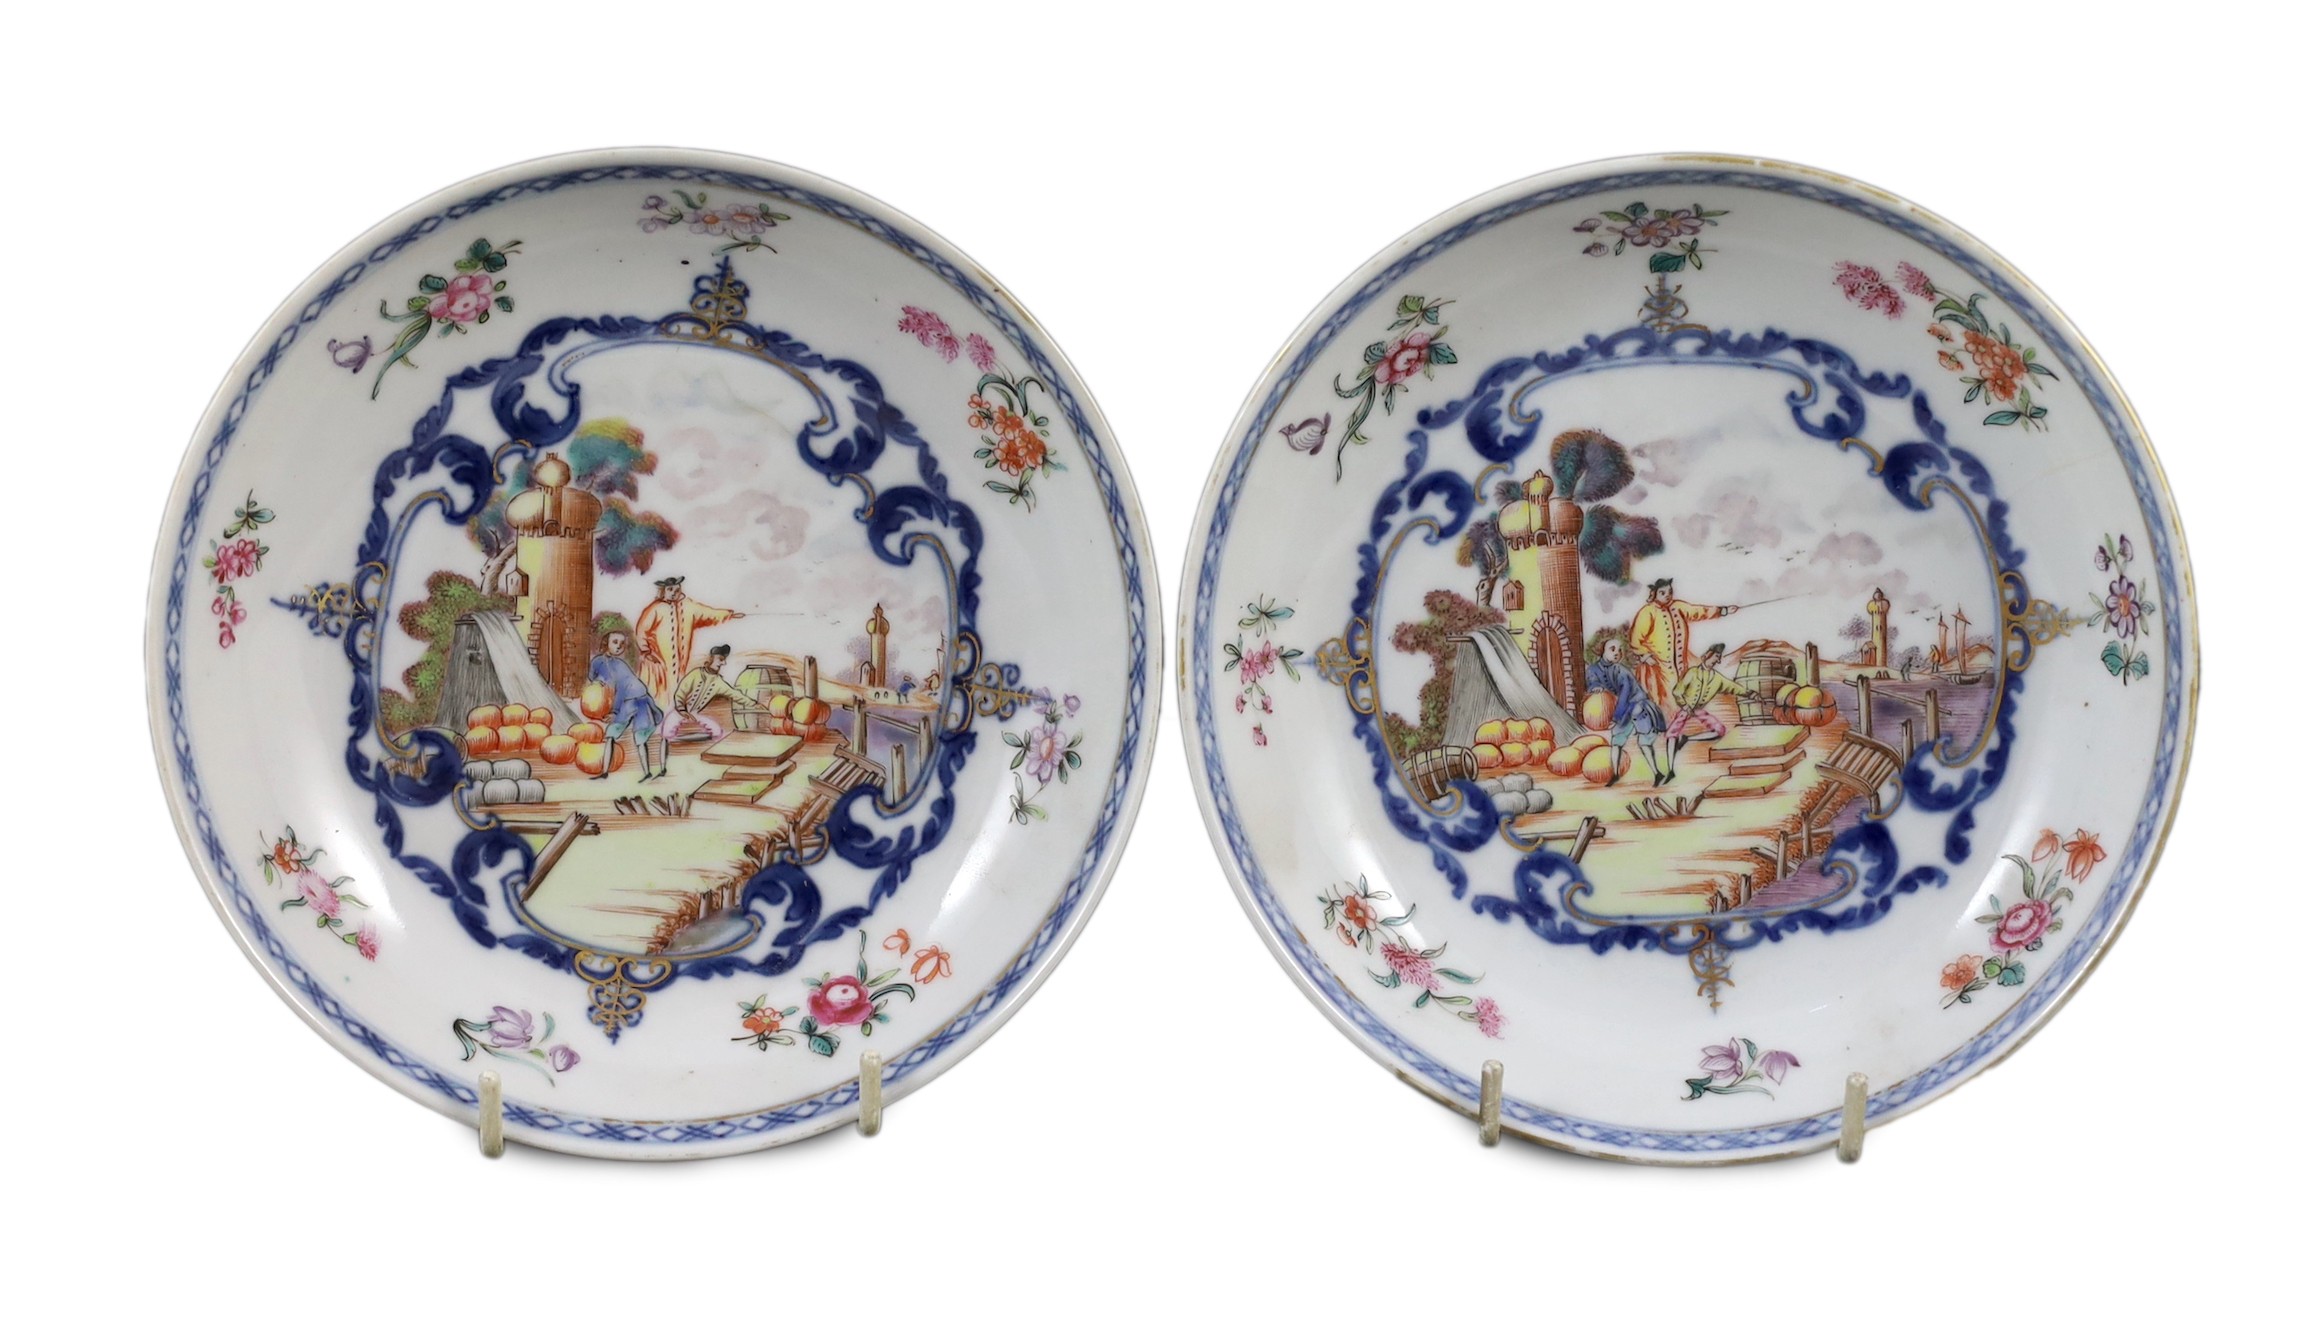 A pair of Chinese export European subject saucer dishes, Qianlong period, 16 cm diameter